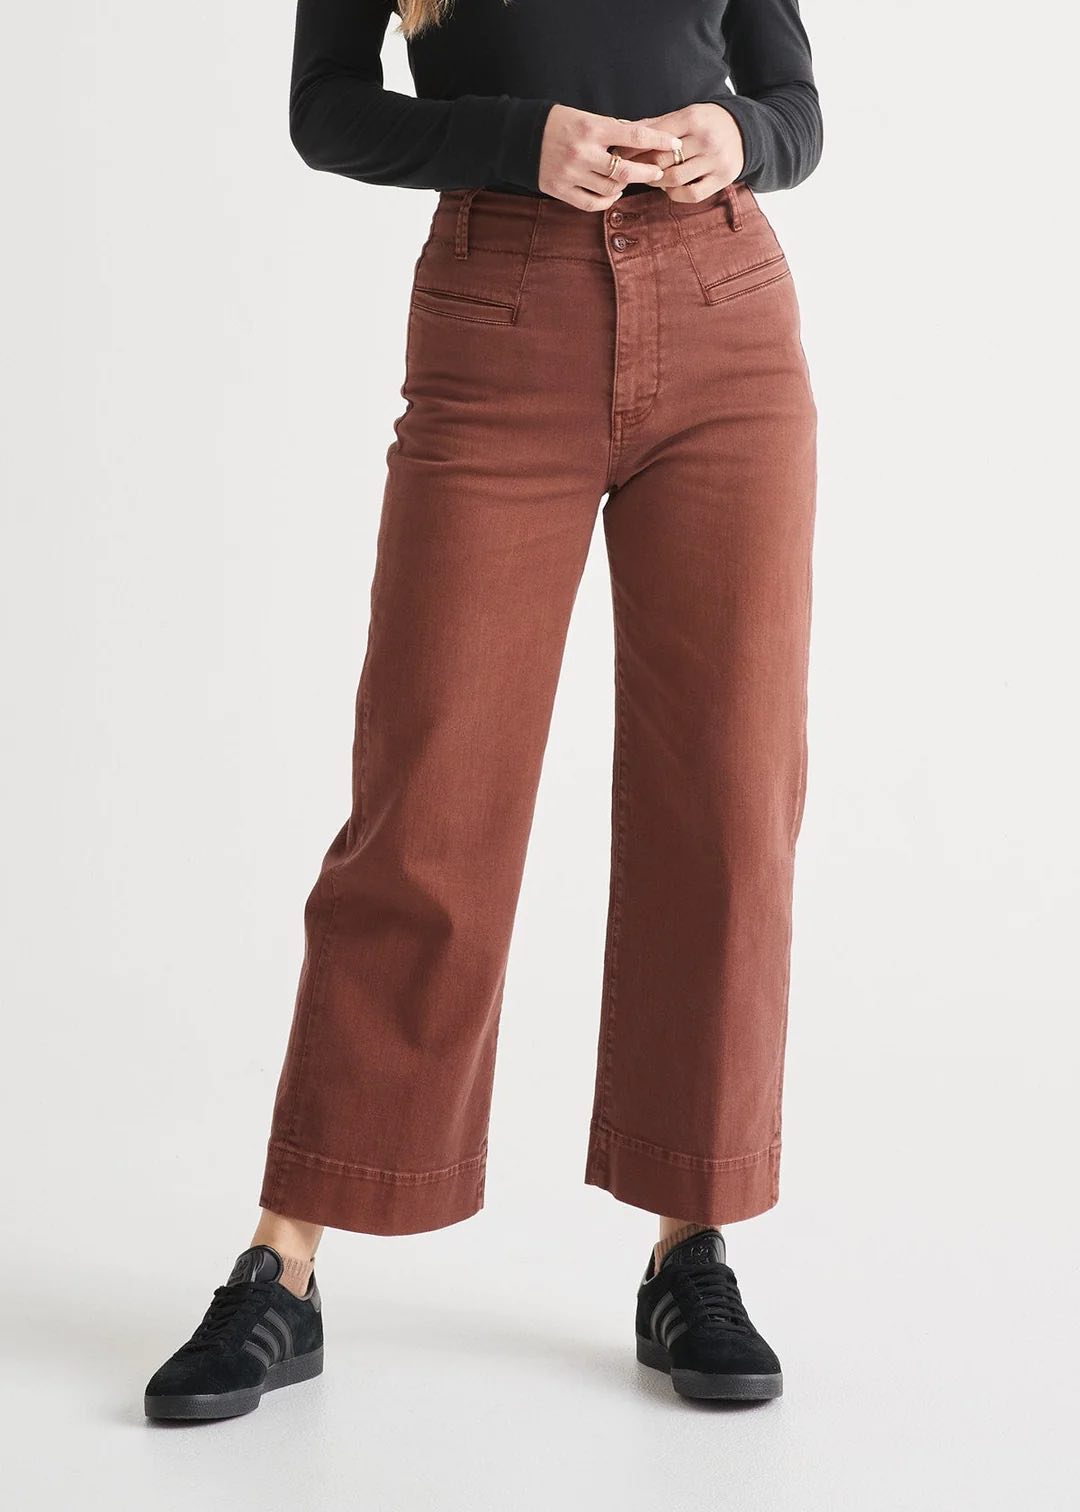 Wearable Trends: High Waist Sailor Pants For The Holidays